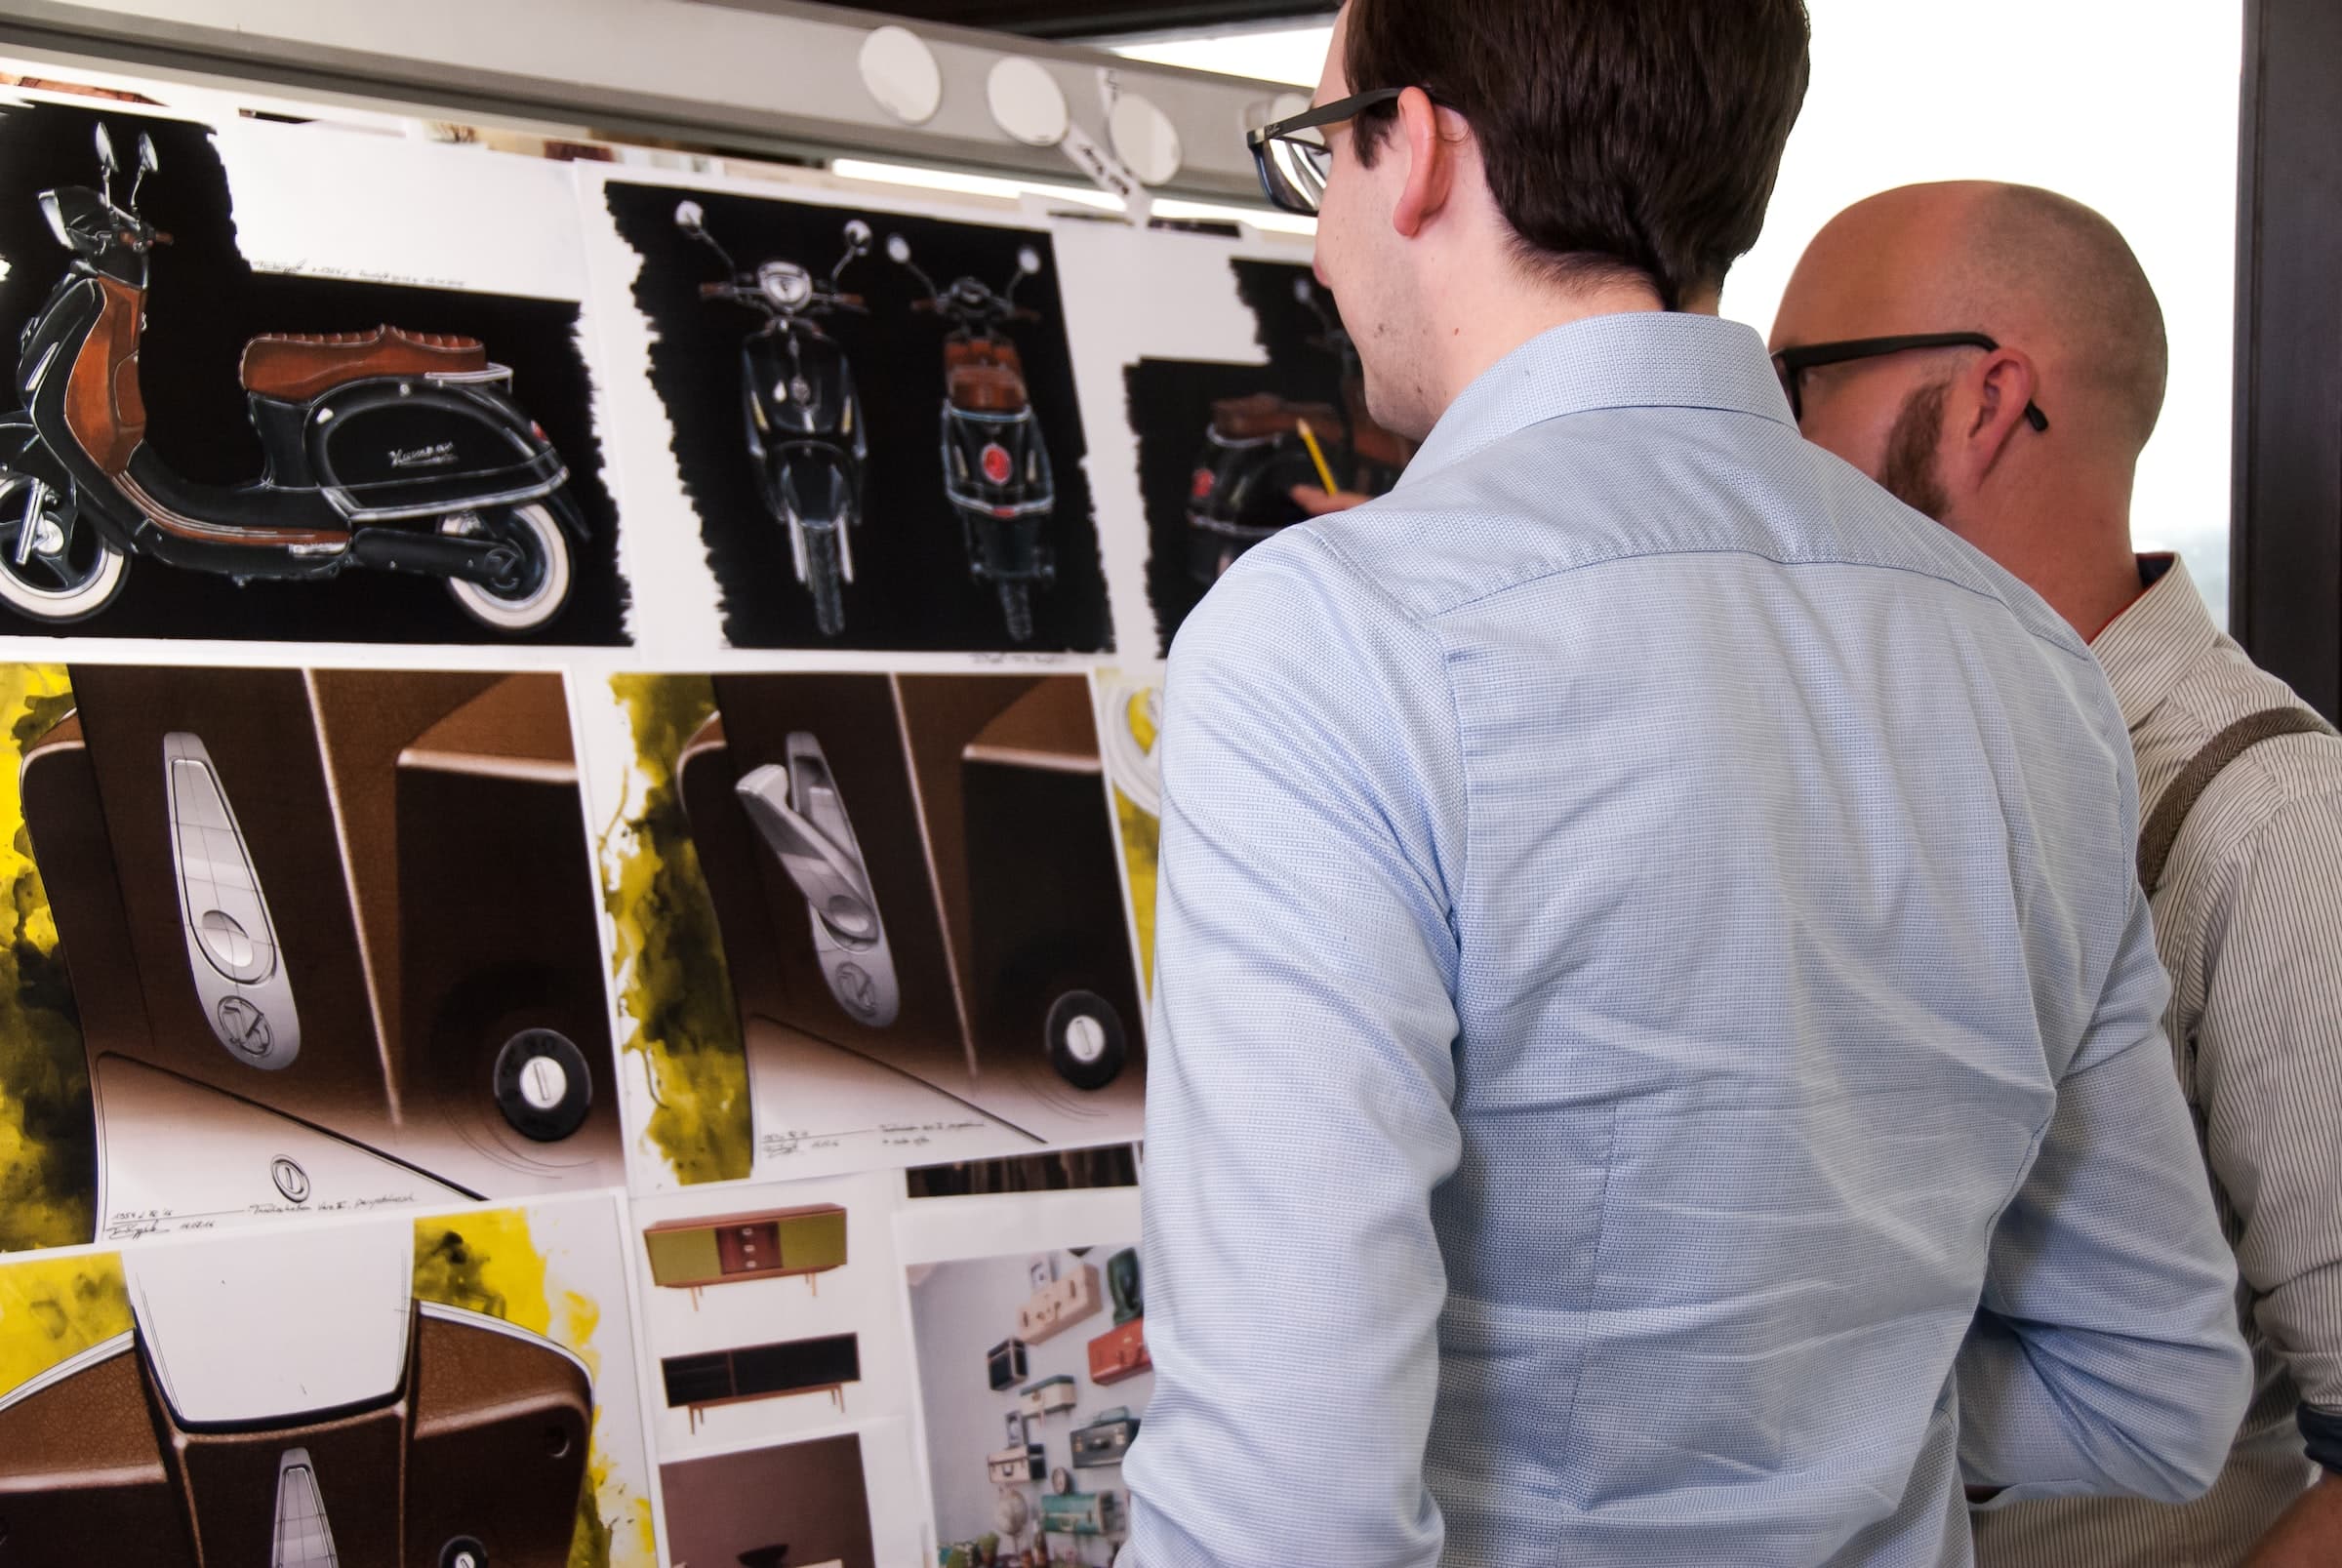 Prototyping helps identify flaws and improve your final products